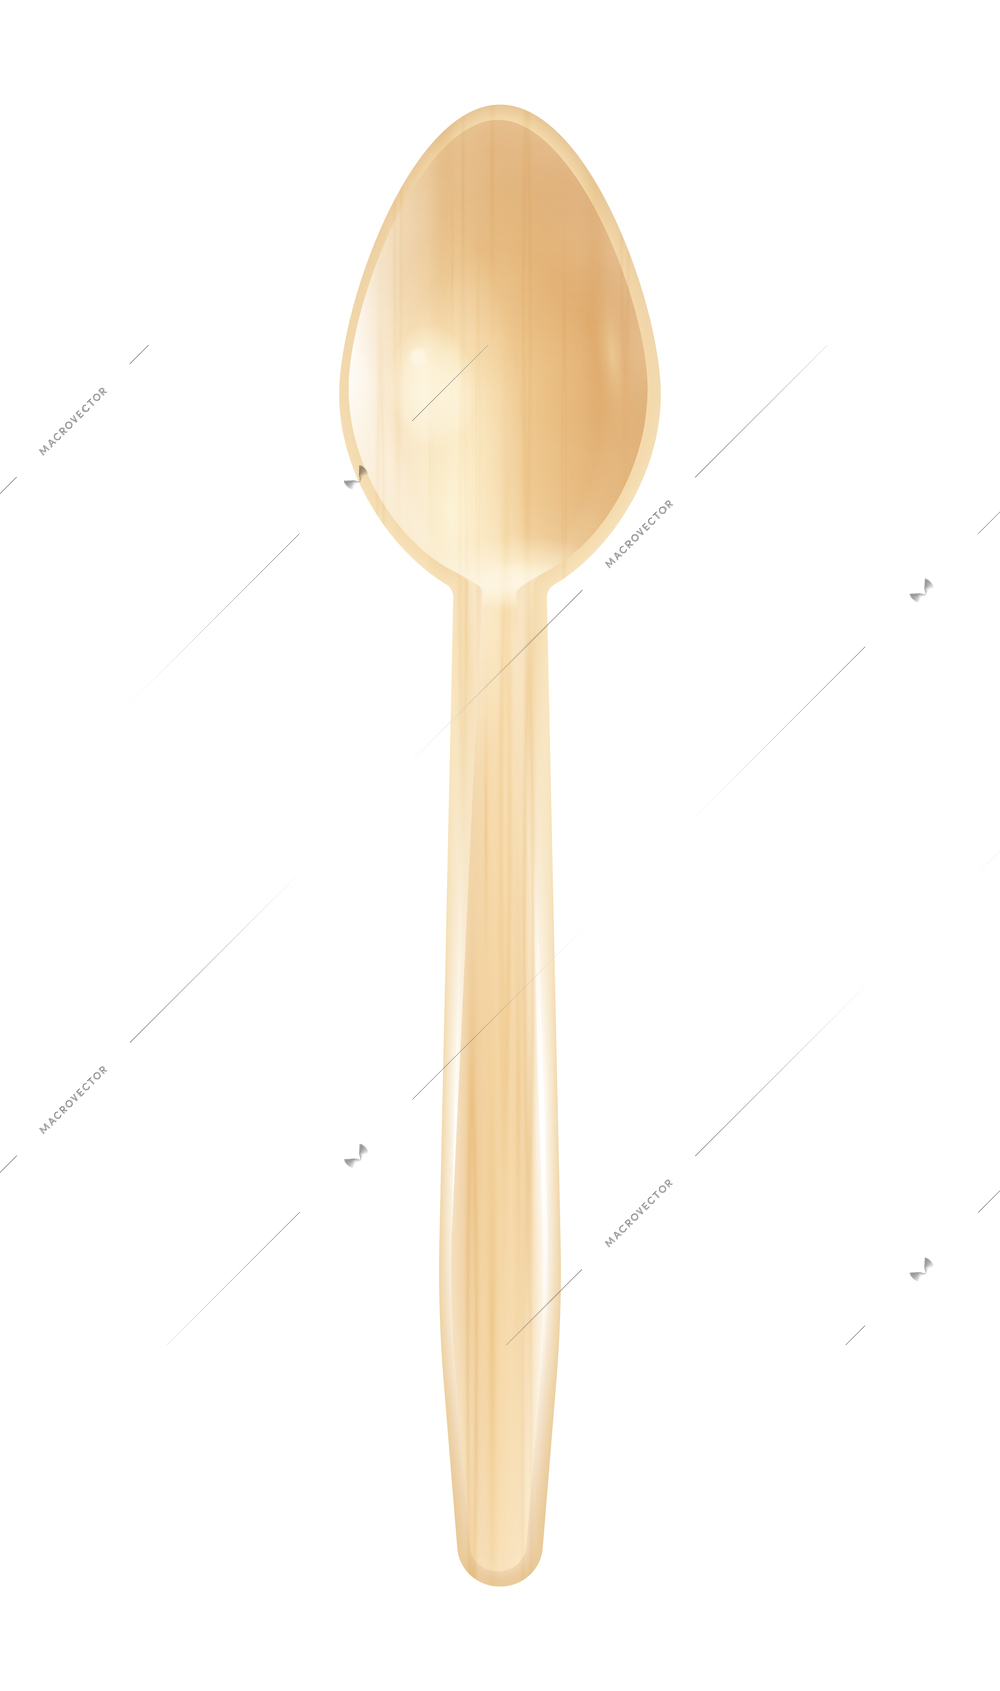 Eco disposable tableware realistic composition with isolated image of wooden spoon vector illustration